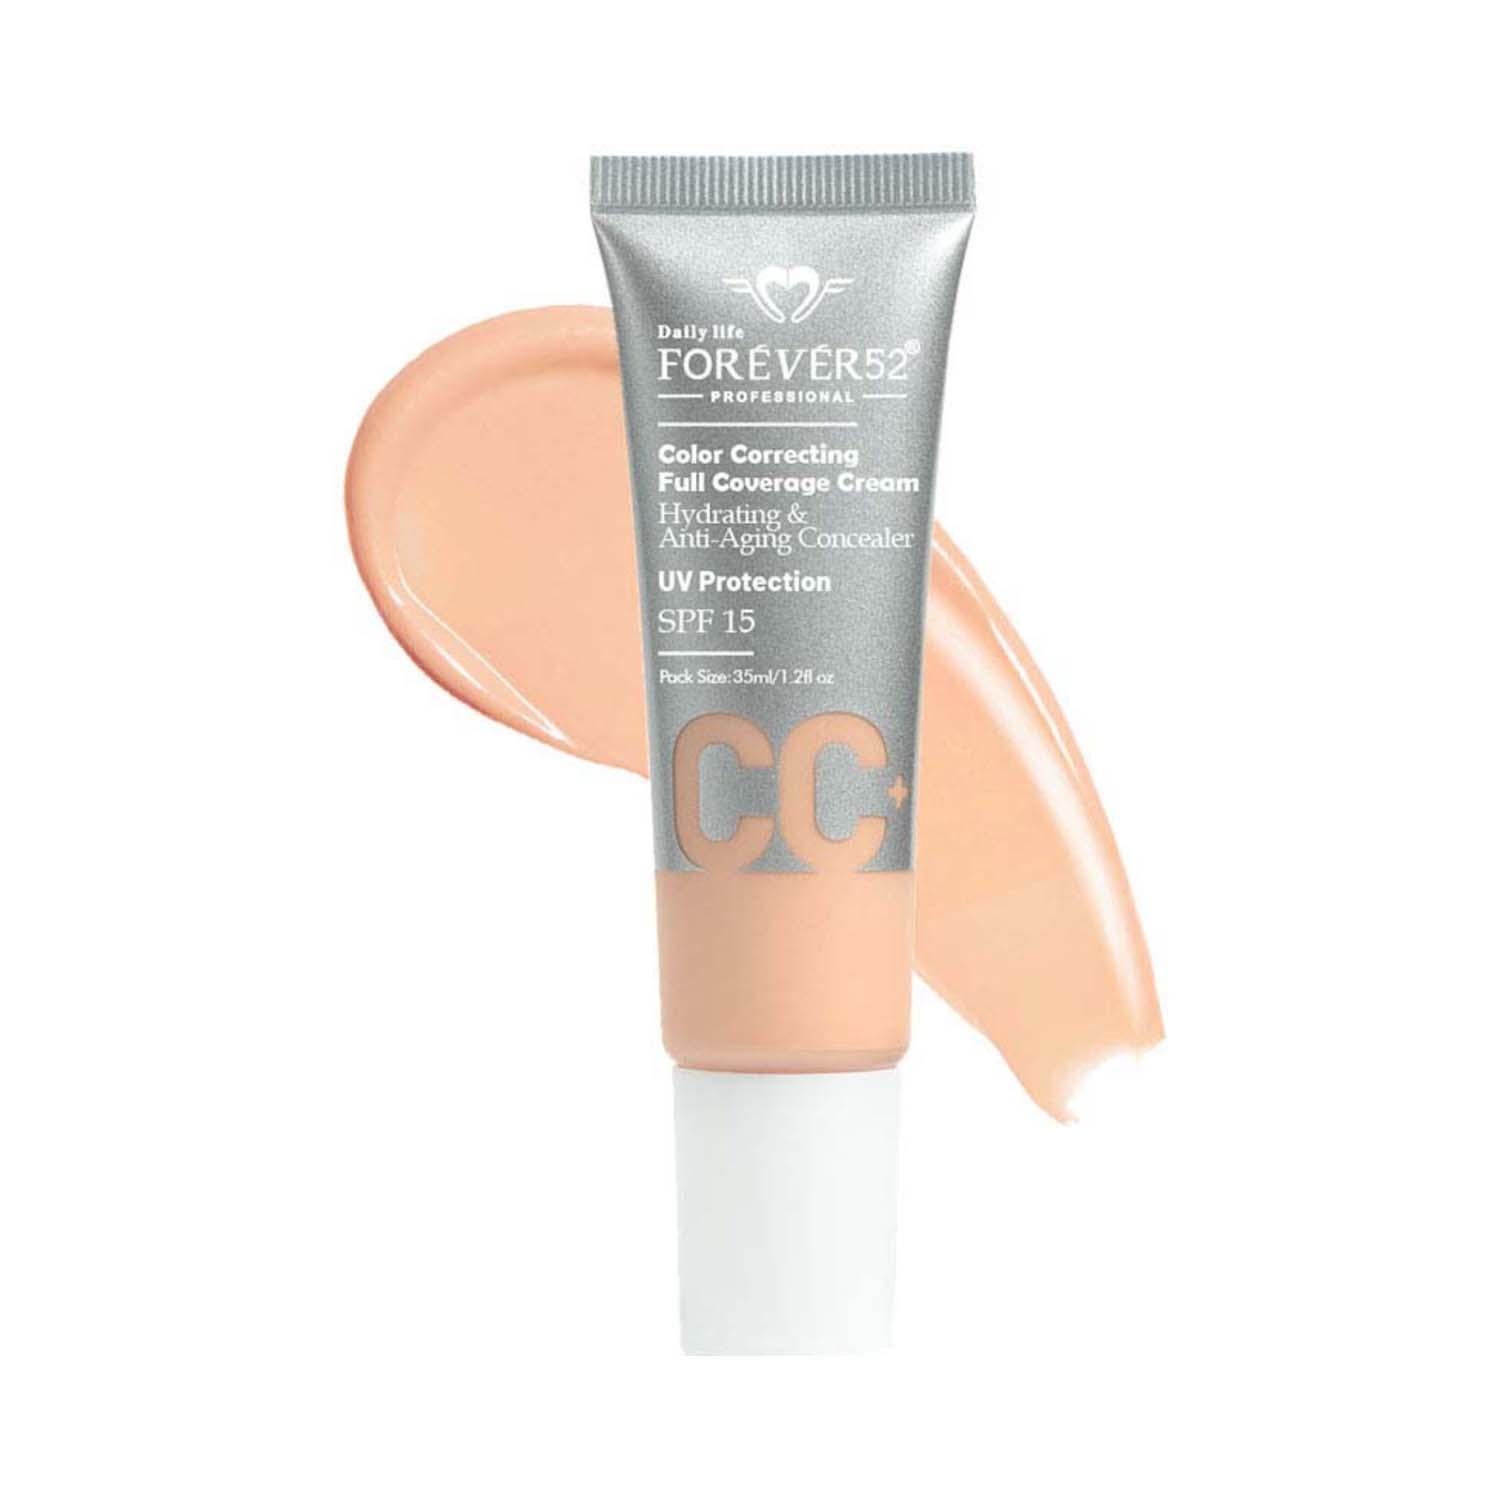 Daily Life Forever52 | Daily Life Forever52 Color Correcting CC Cream With SPF 15 - 002 Breezy (35 ml)